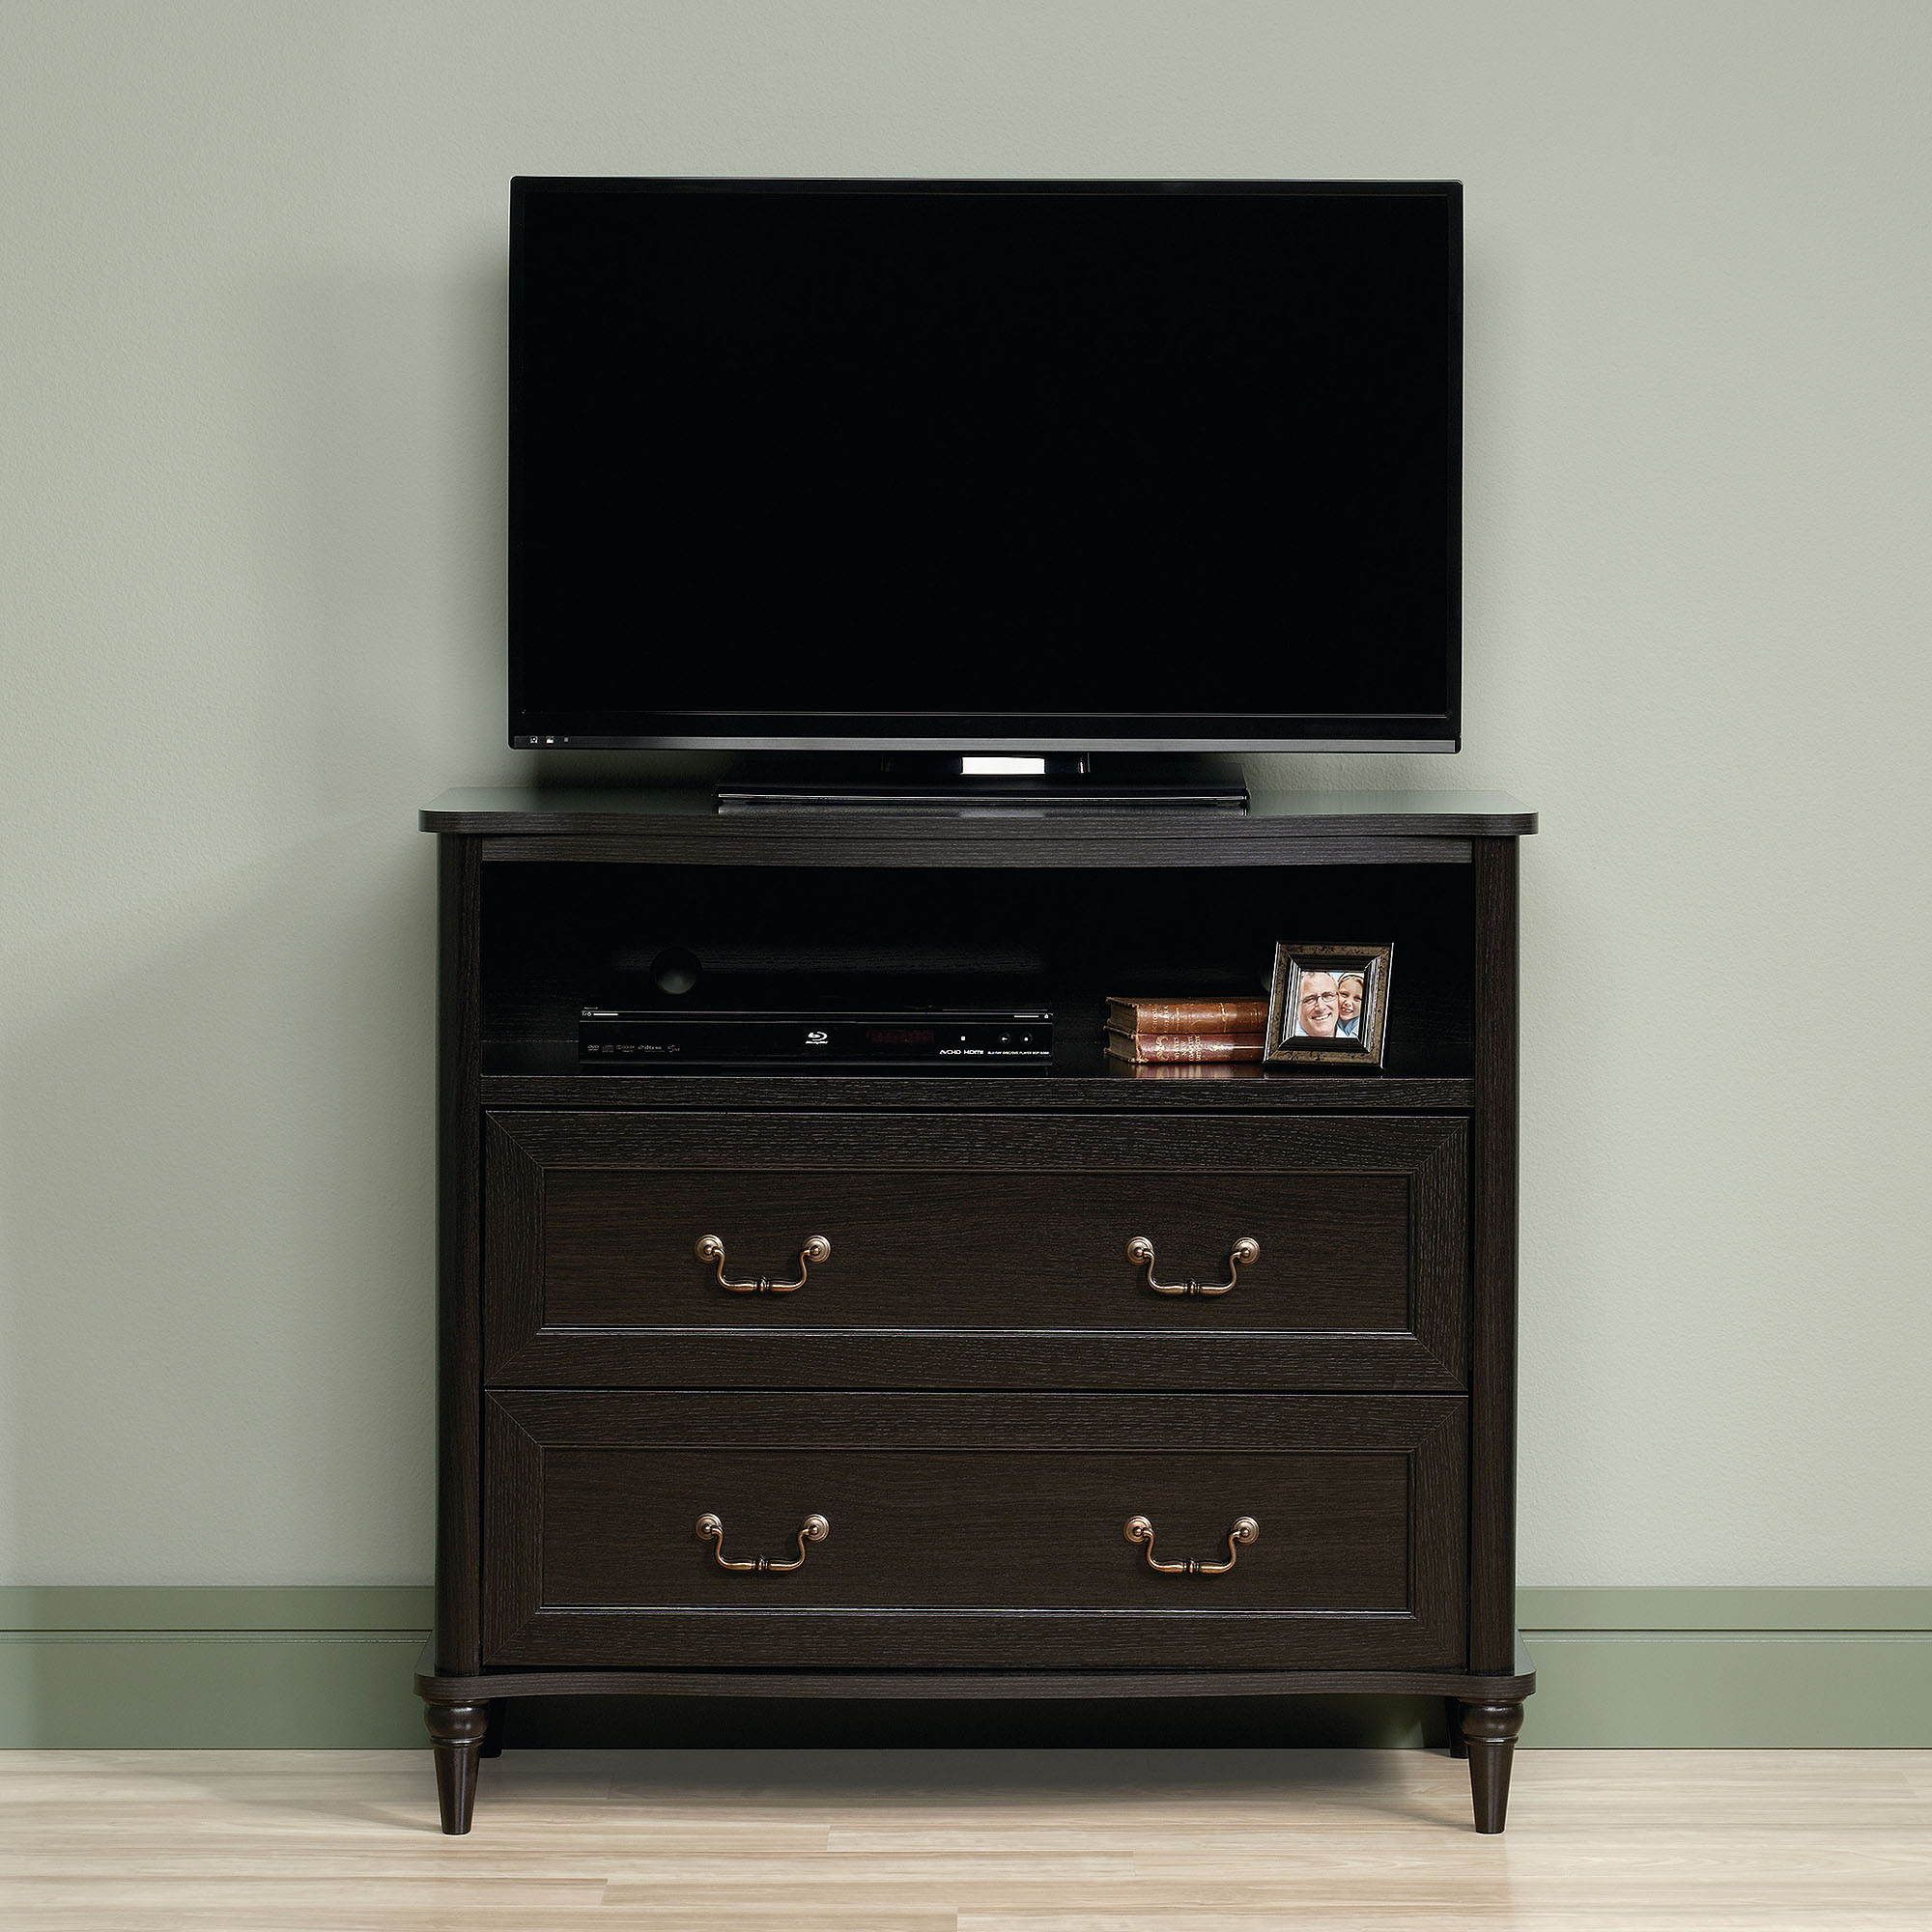 Sauder Wakefield Wind Oak Highboy TV Stand for TVs up to 42"